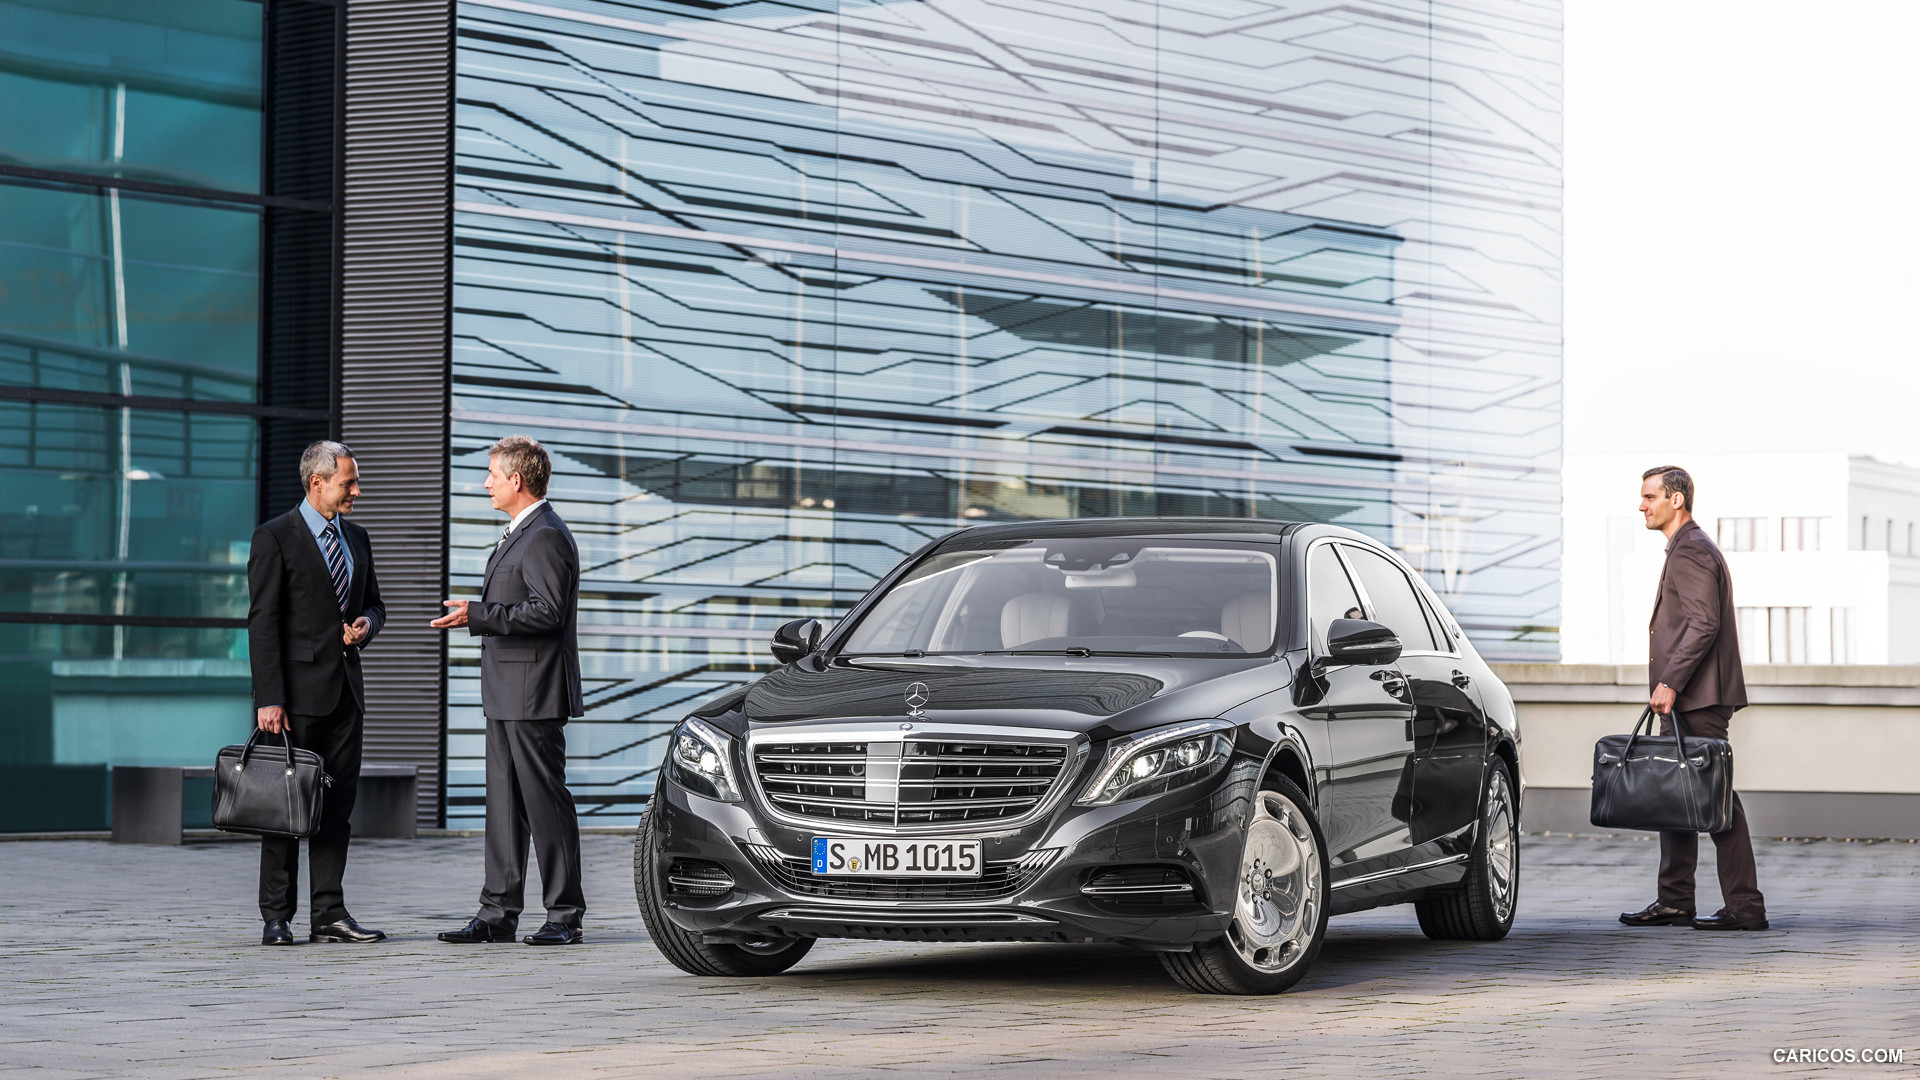 2016 Mercedes-Maybach S-Class S600 - Front, #3 of 225